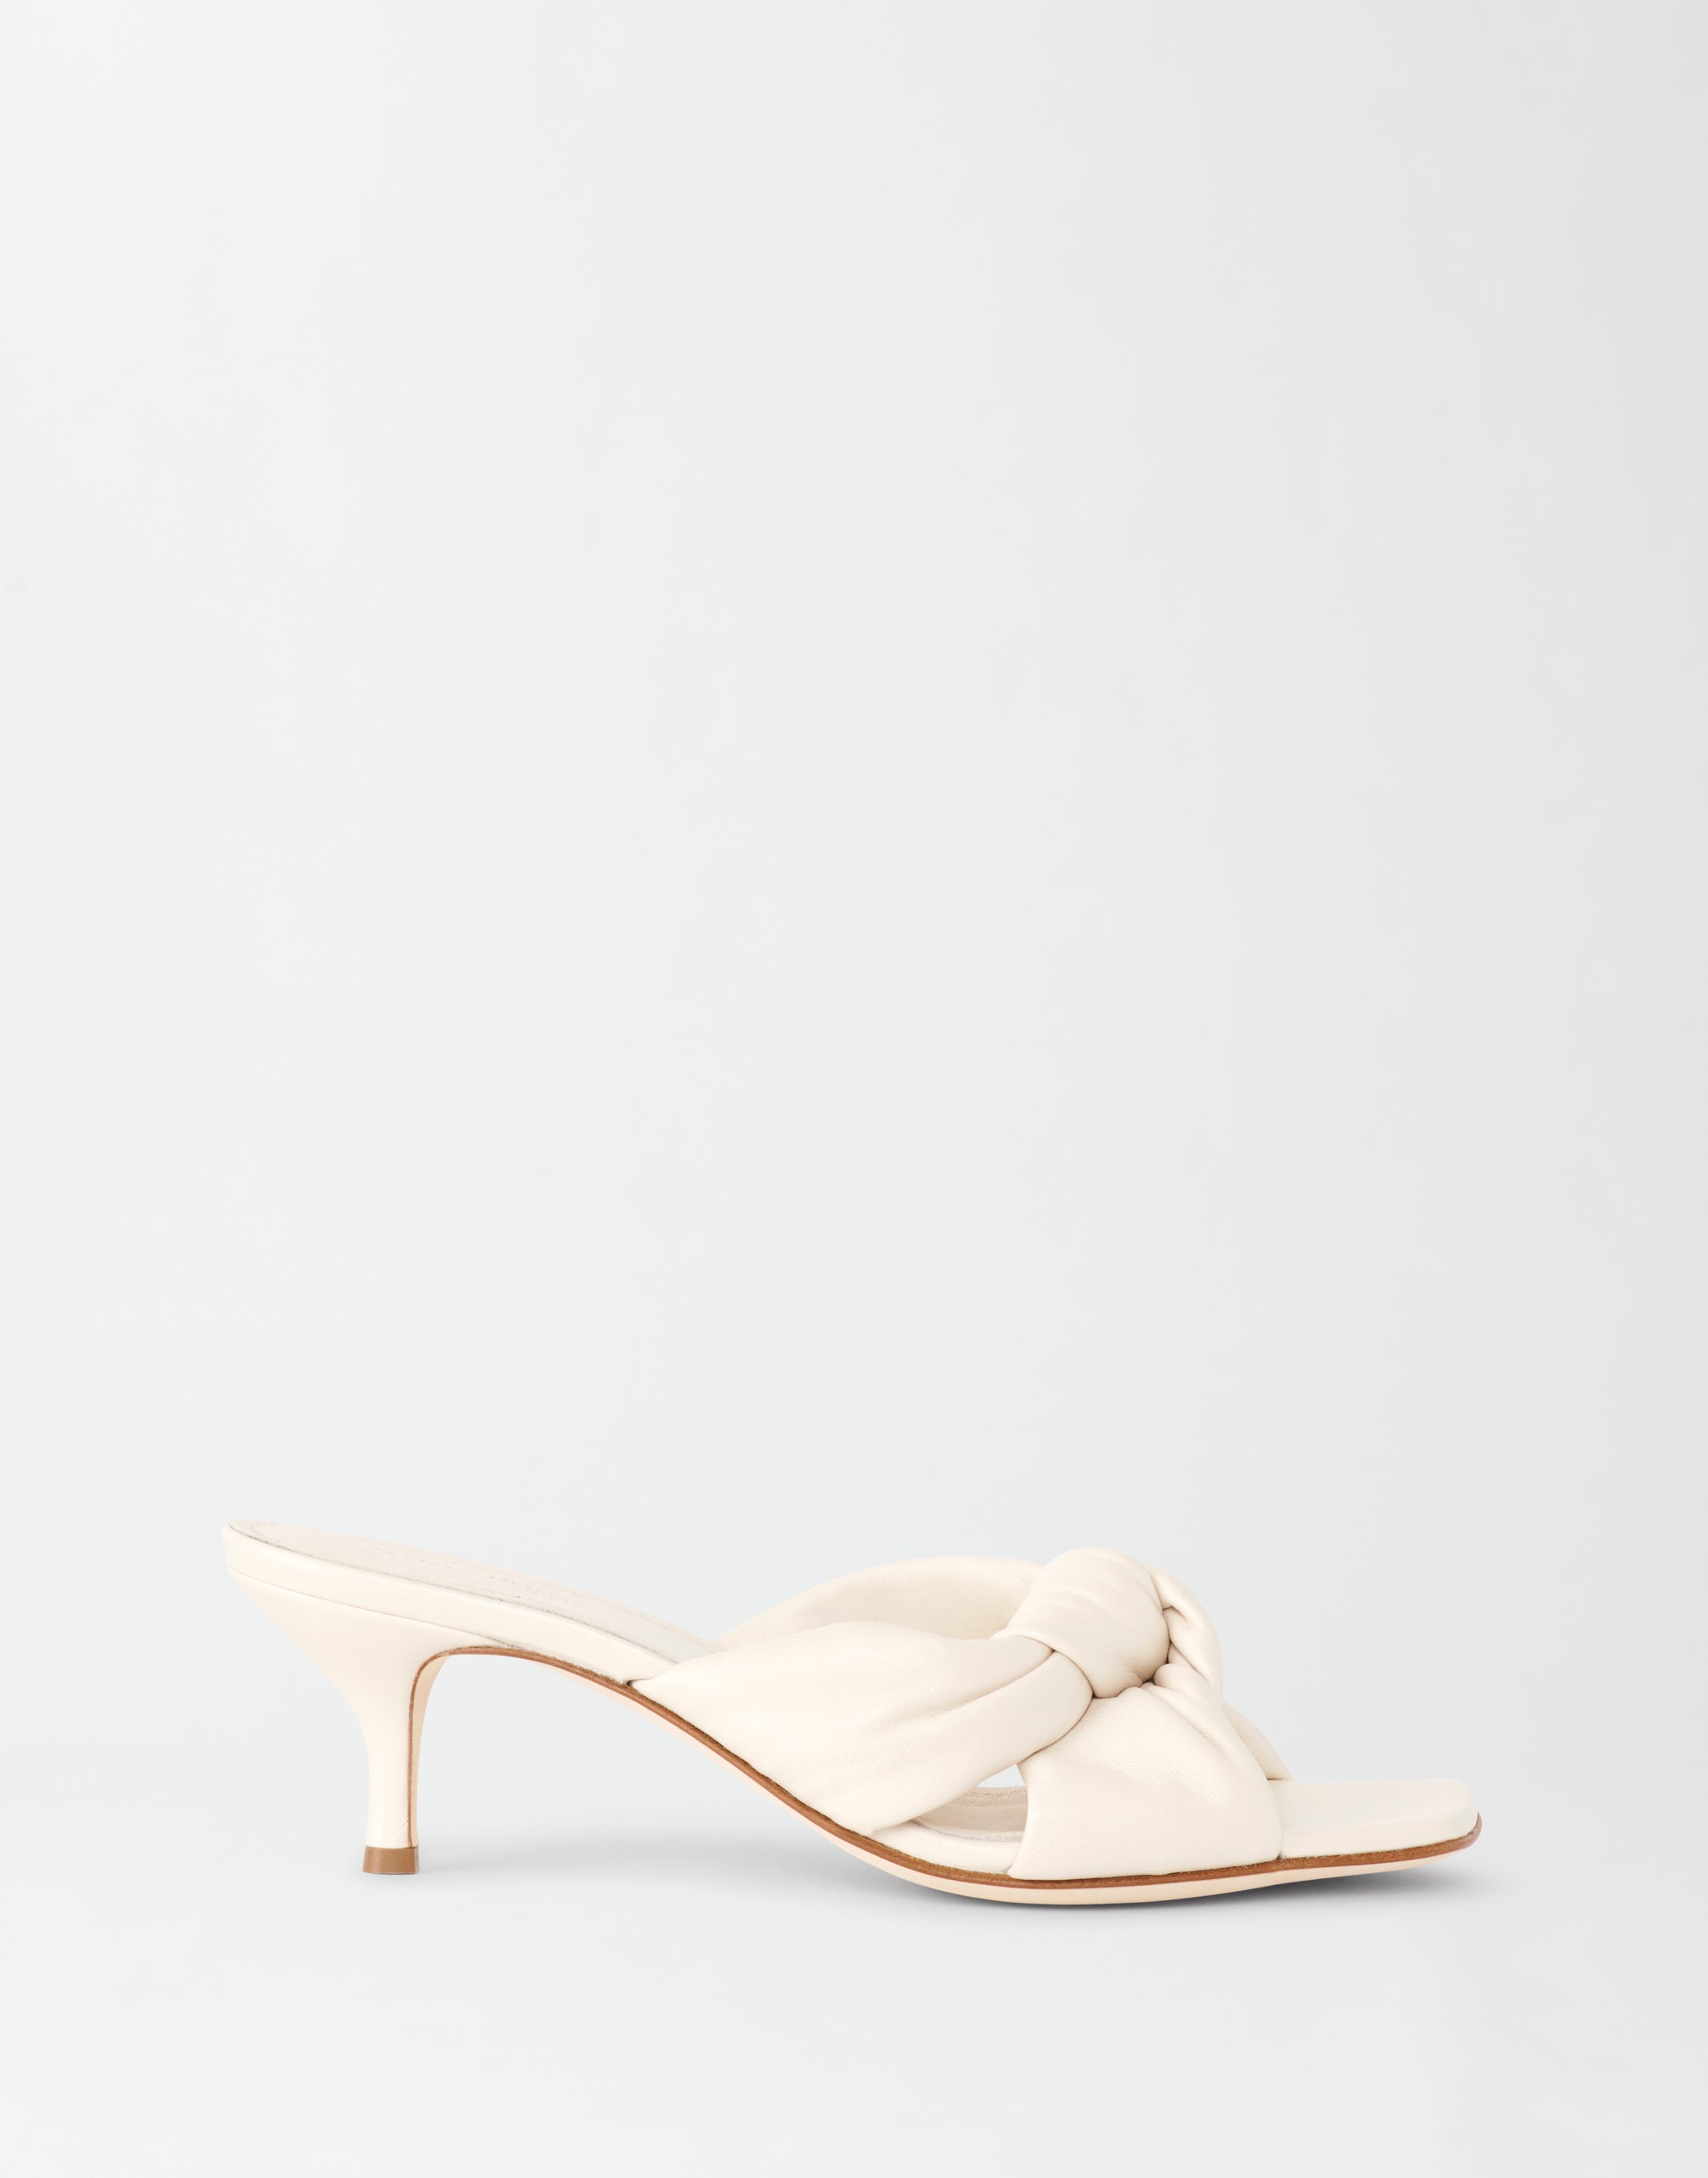 Nappa leather mules, butter